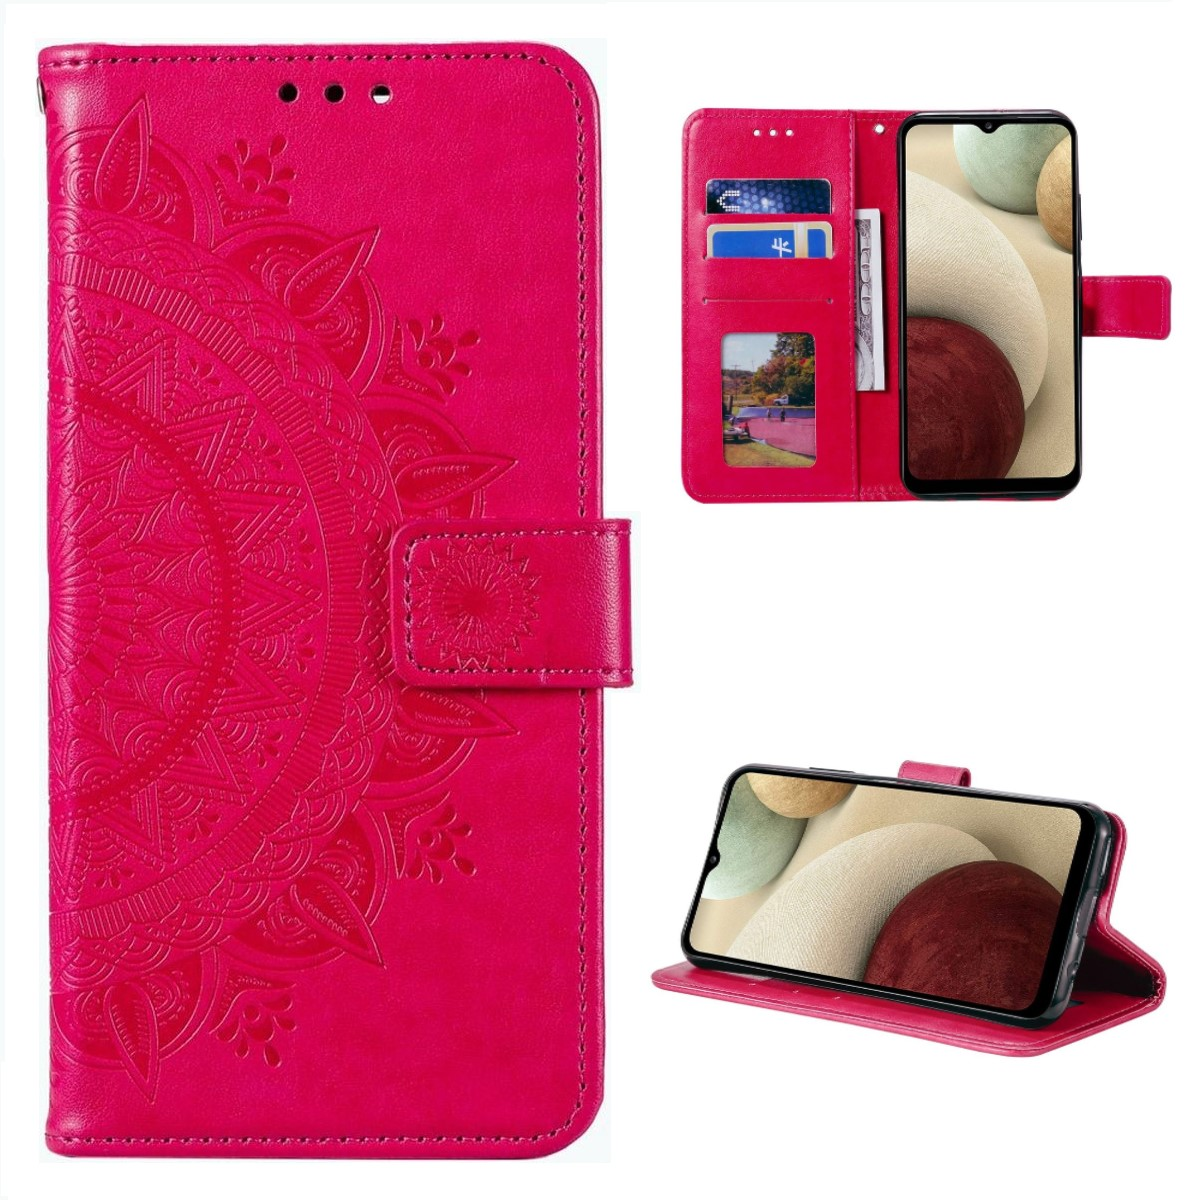 COVERKINGZ Samsung, Bookcover, Mandala Klapphülle mit Galaxy Pink 5G, Muster, M33